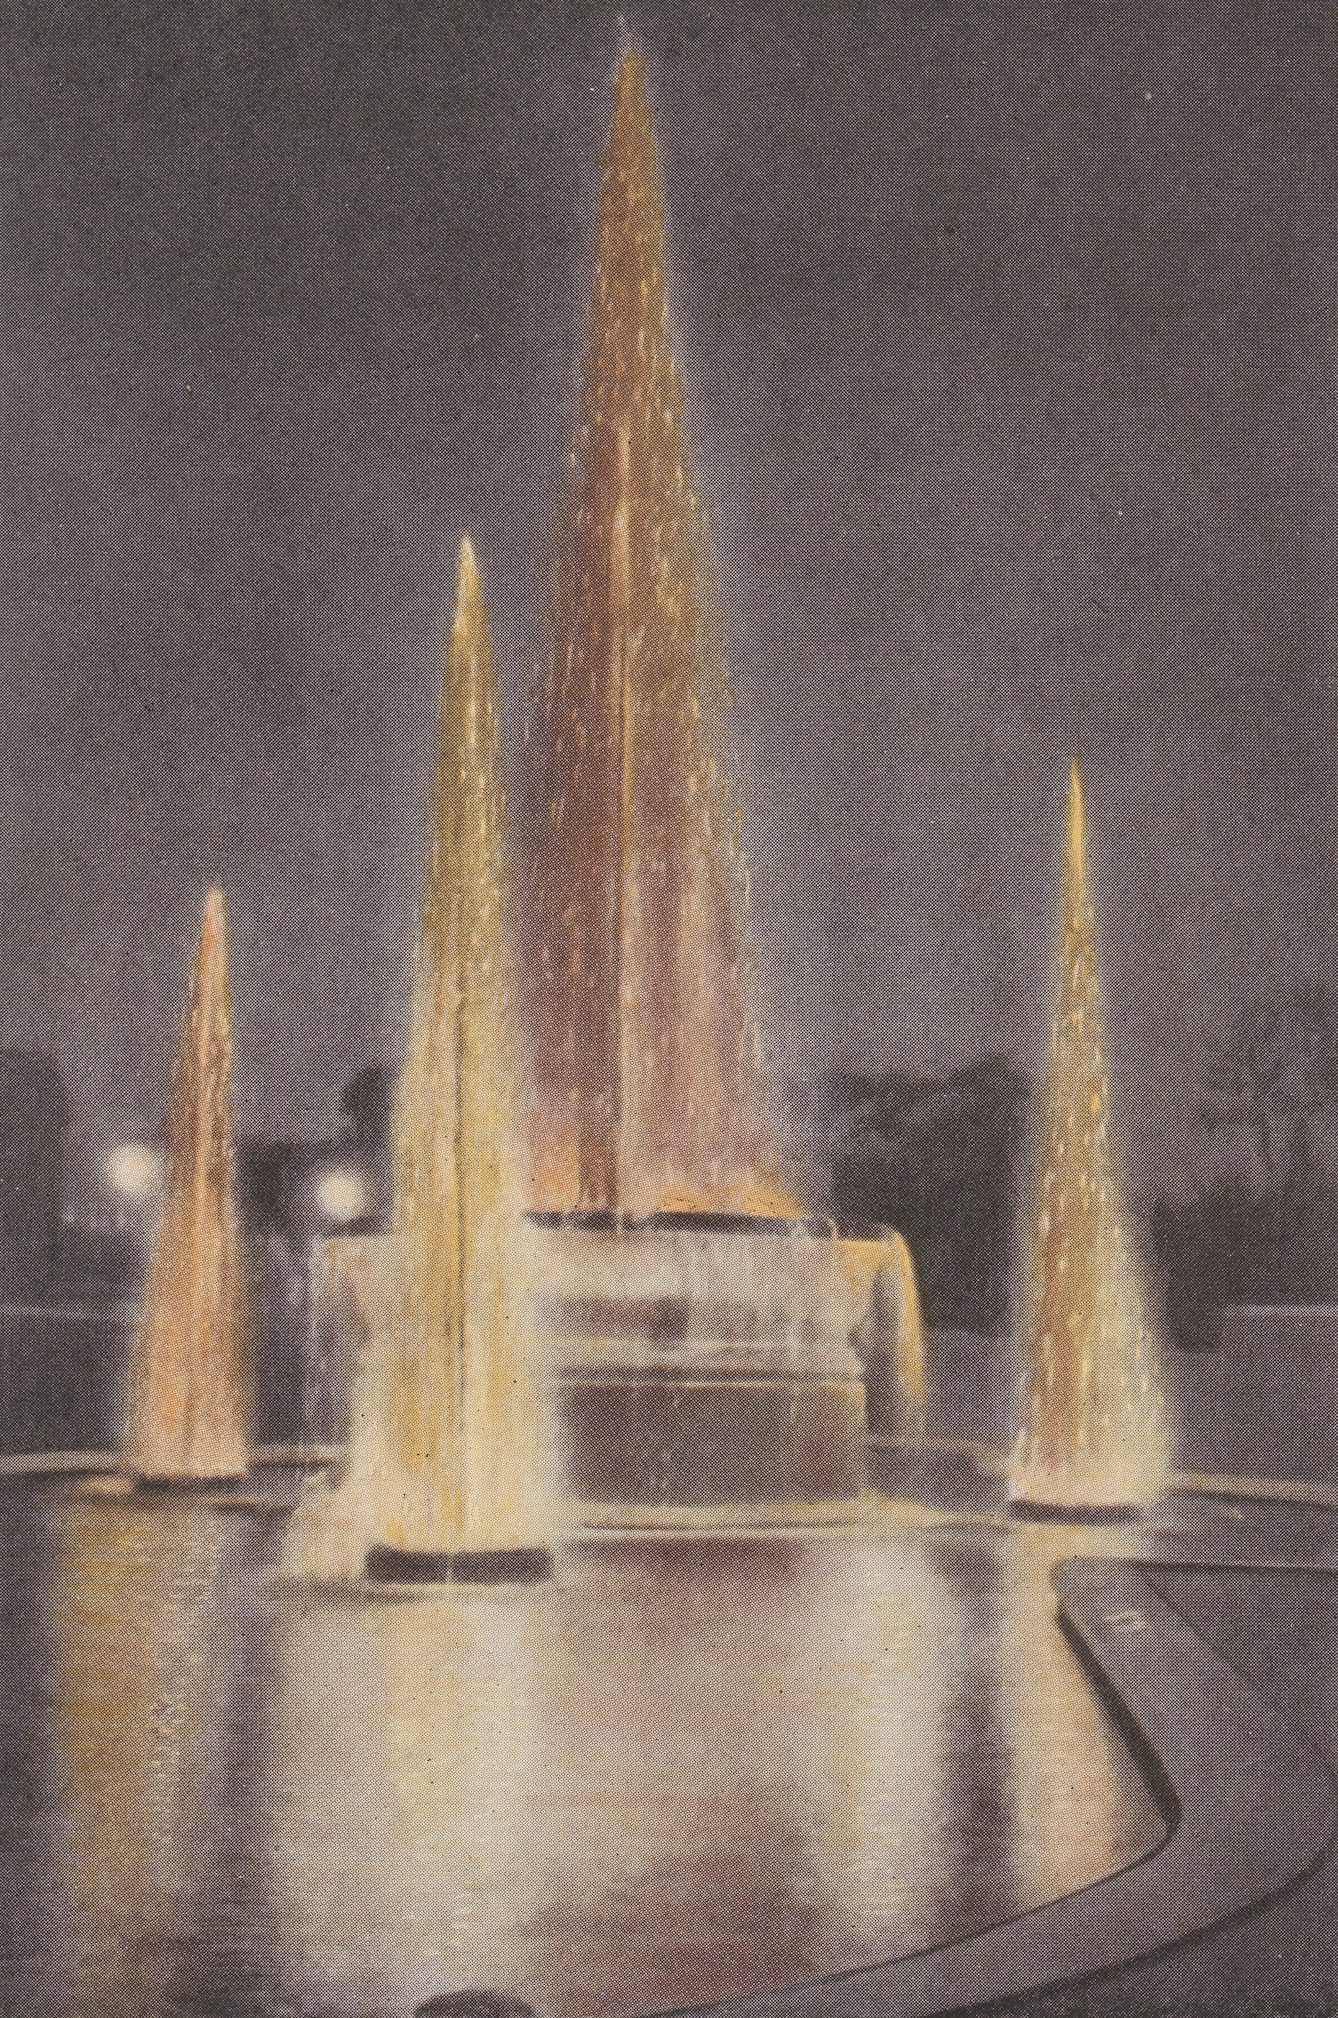 The dazzling combination of light and falling water made the illuminated fountain a popular installation at technology exhibitions and elsewhere.